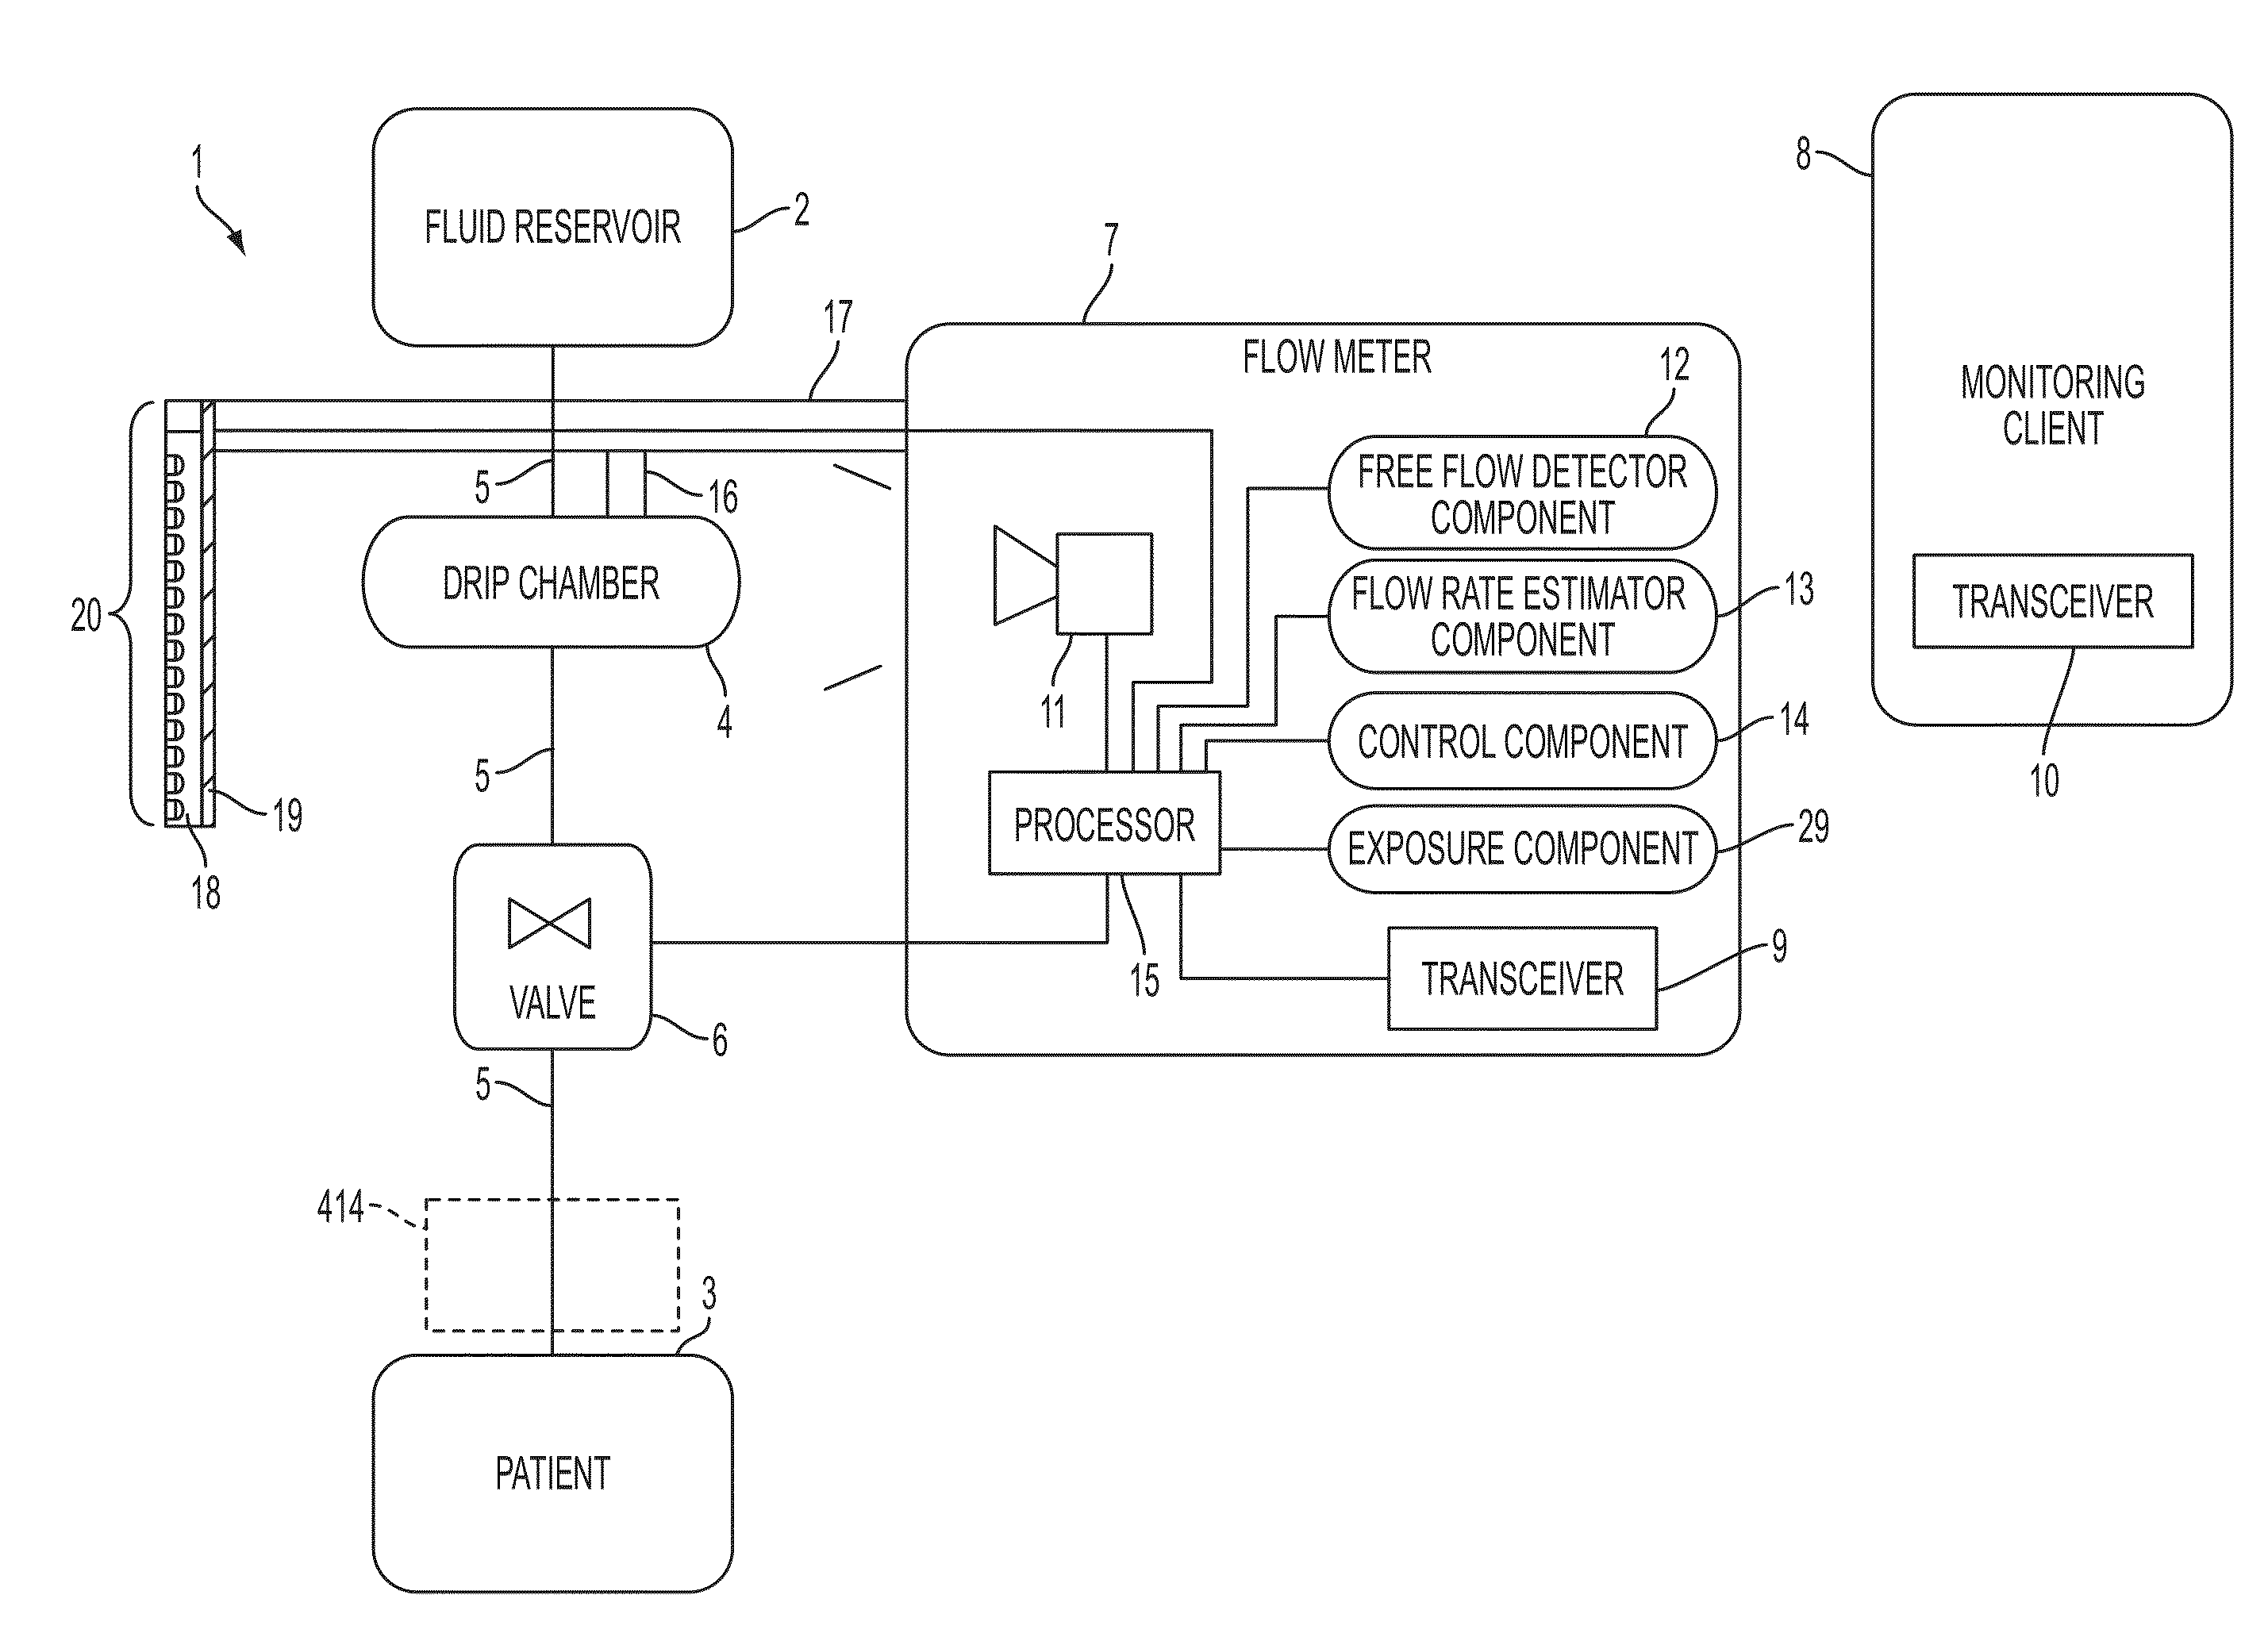 Flow meter having a background pattern with first and second portions